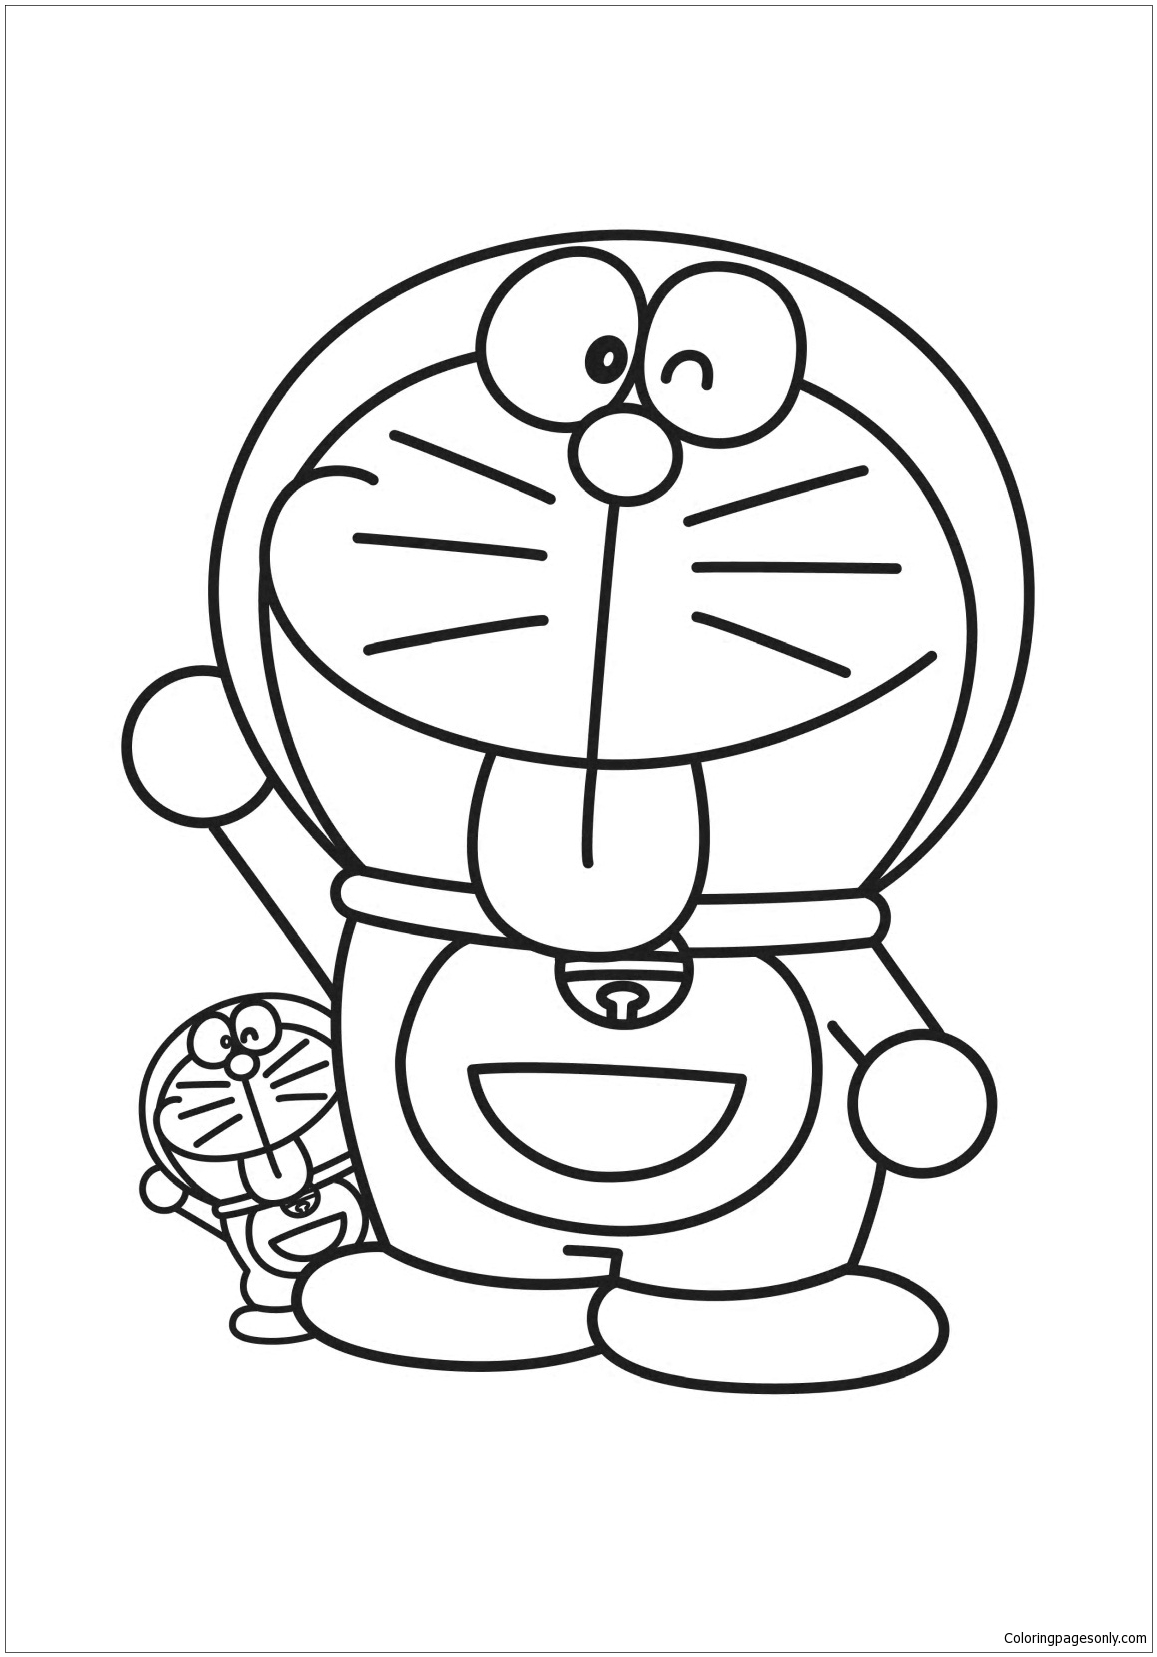 Doraemon 20 Coloring Pages   Doraemon Coloring Pages   Coloring ...